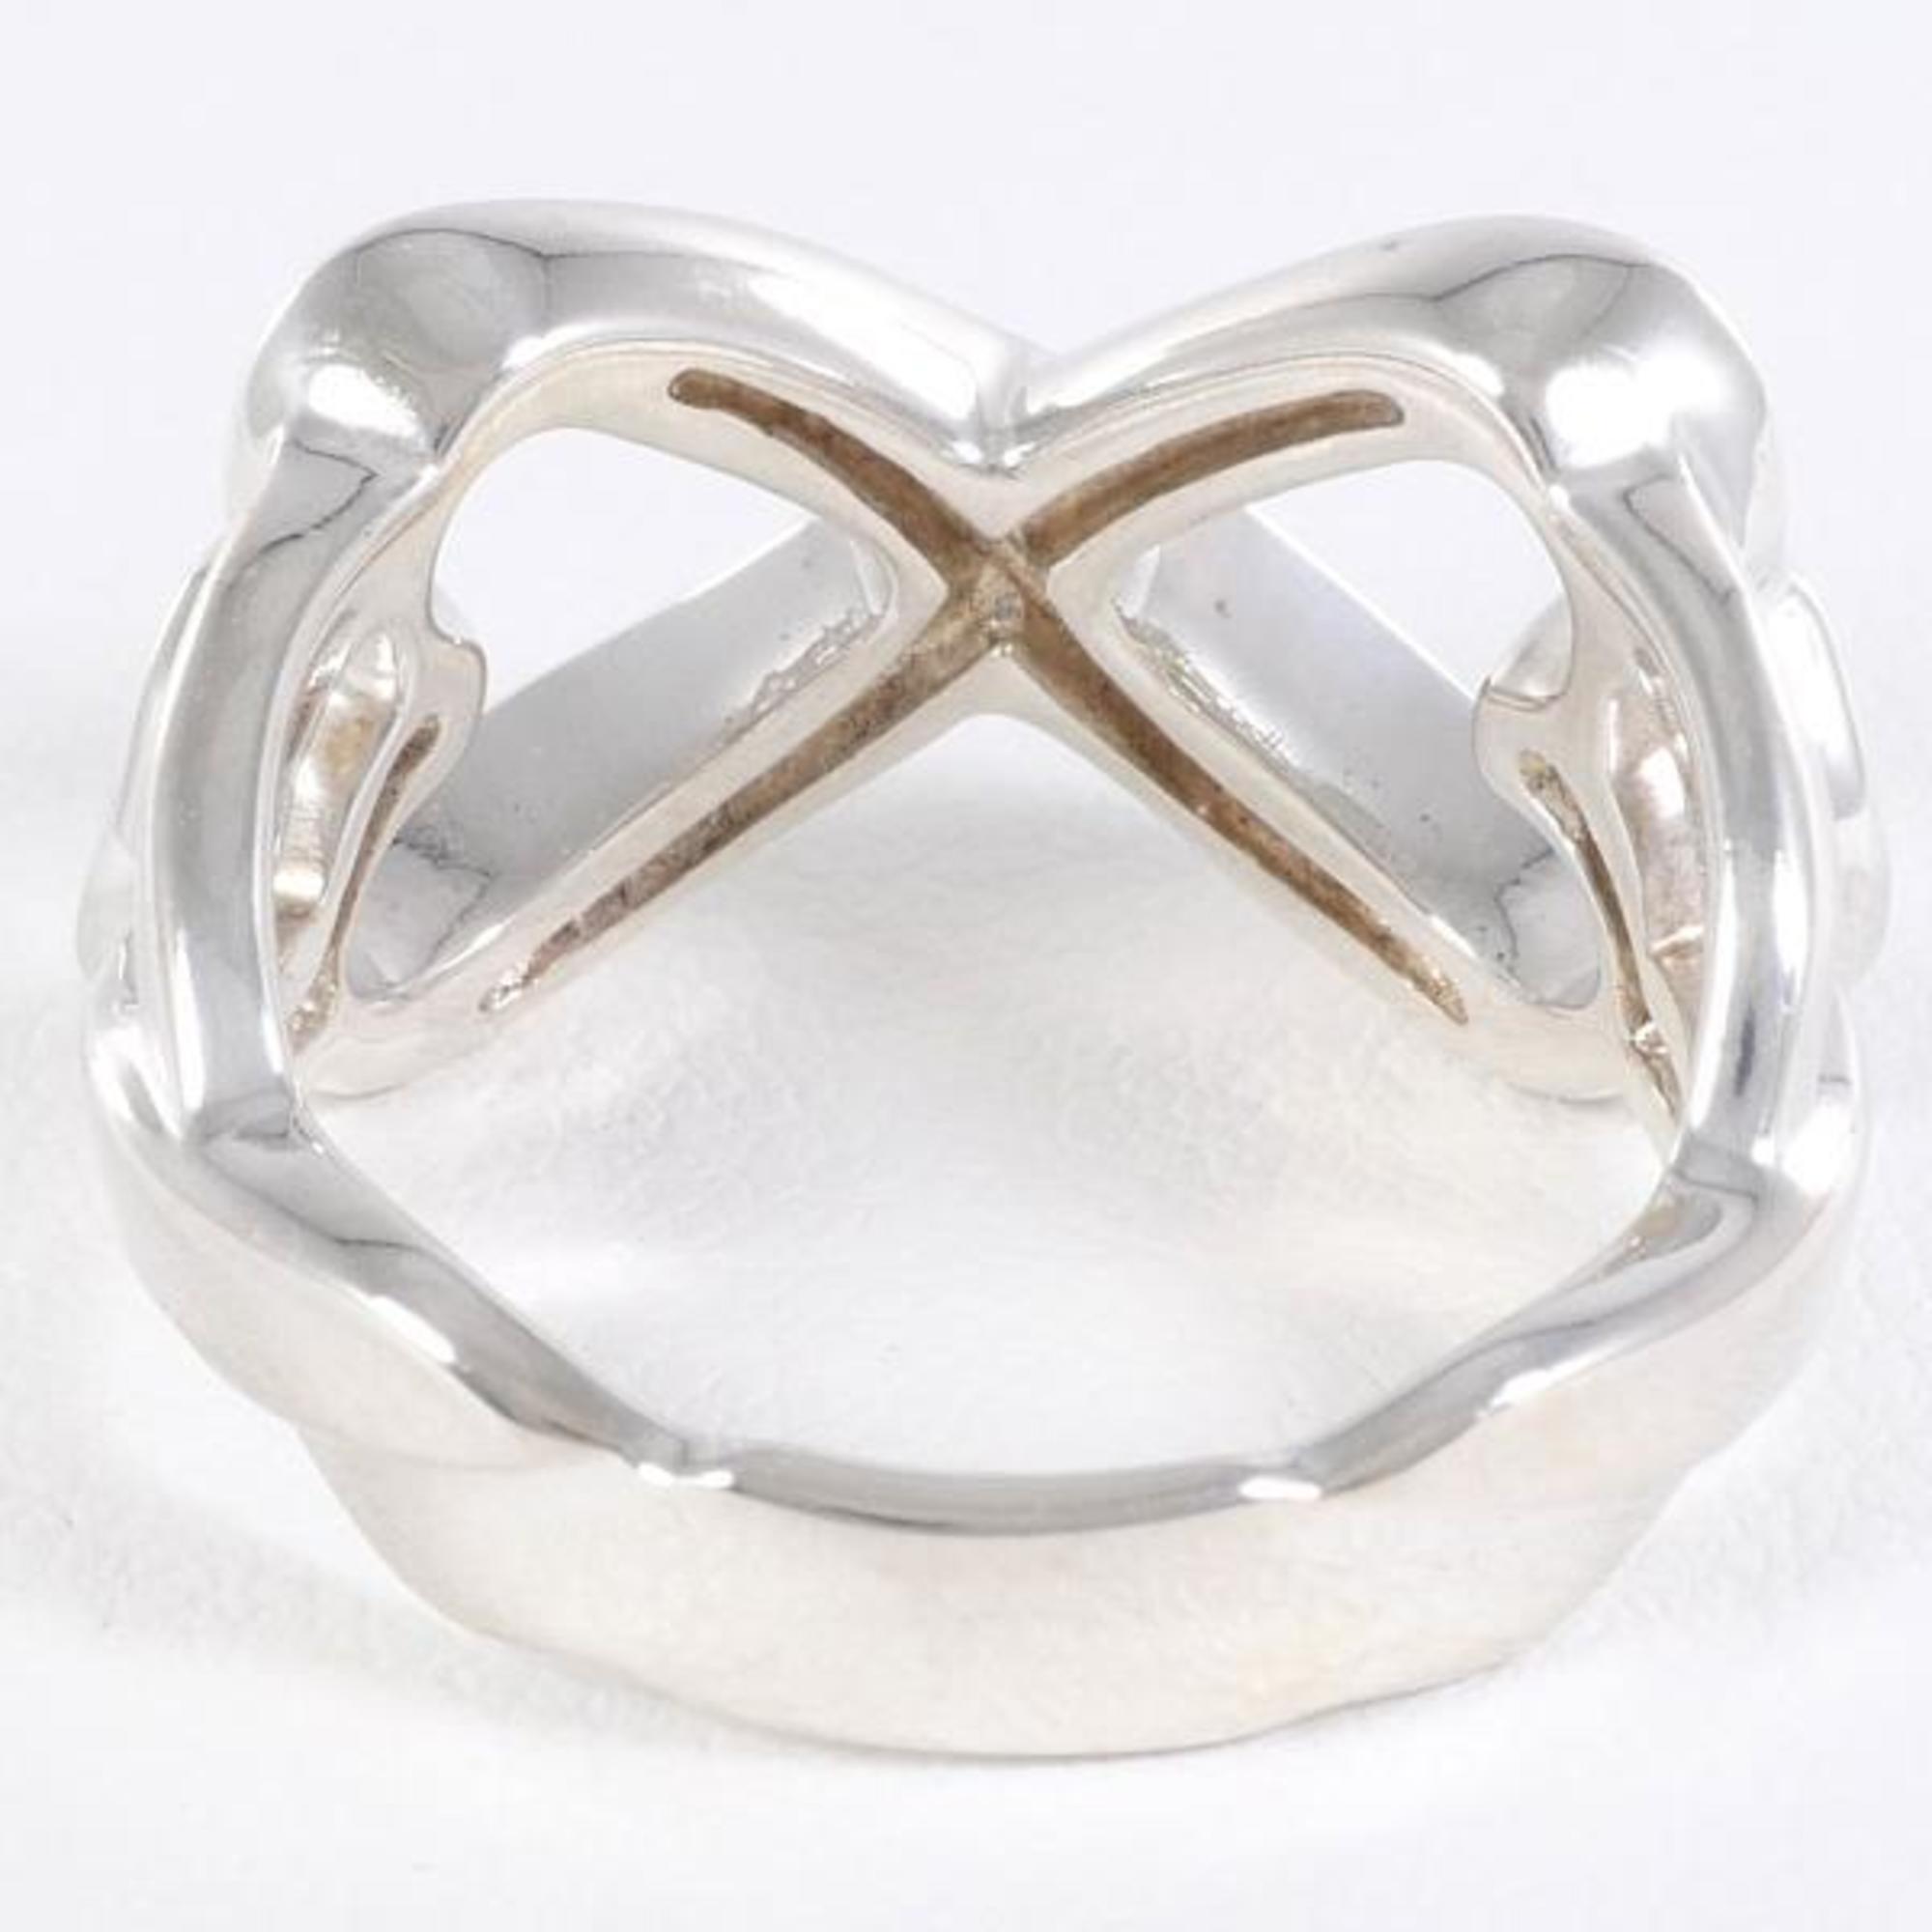 Tiffany Double Loving Heart Silver Ring No. 7 Total Weight Approx. 4.4g Jewelry